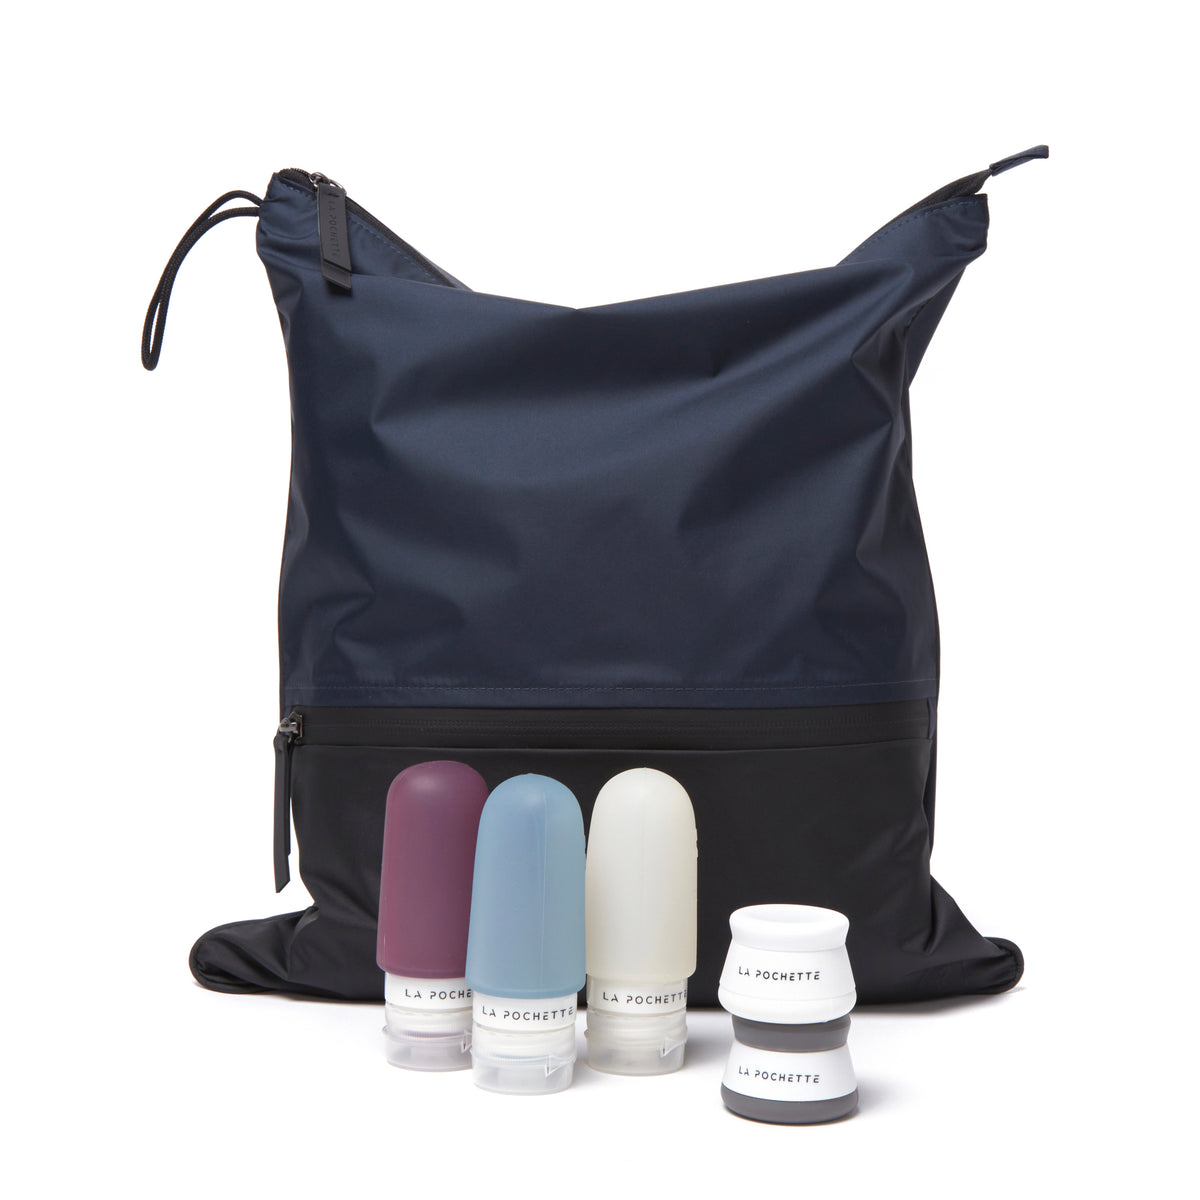 Travel Bottle Trio with travel pots next to Sweat Bag in Midnight Ink colourway 